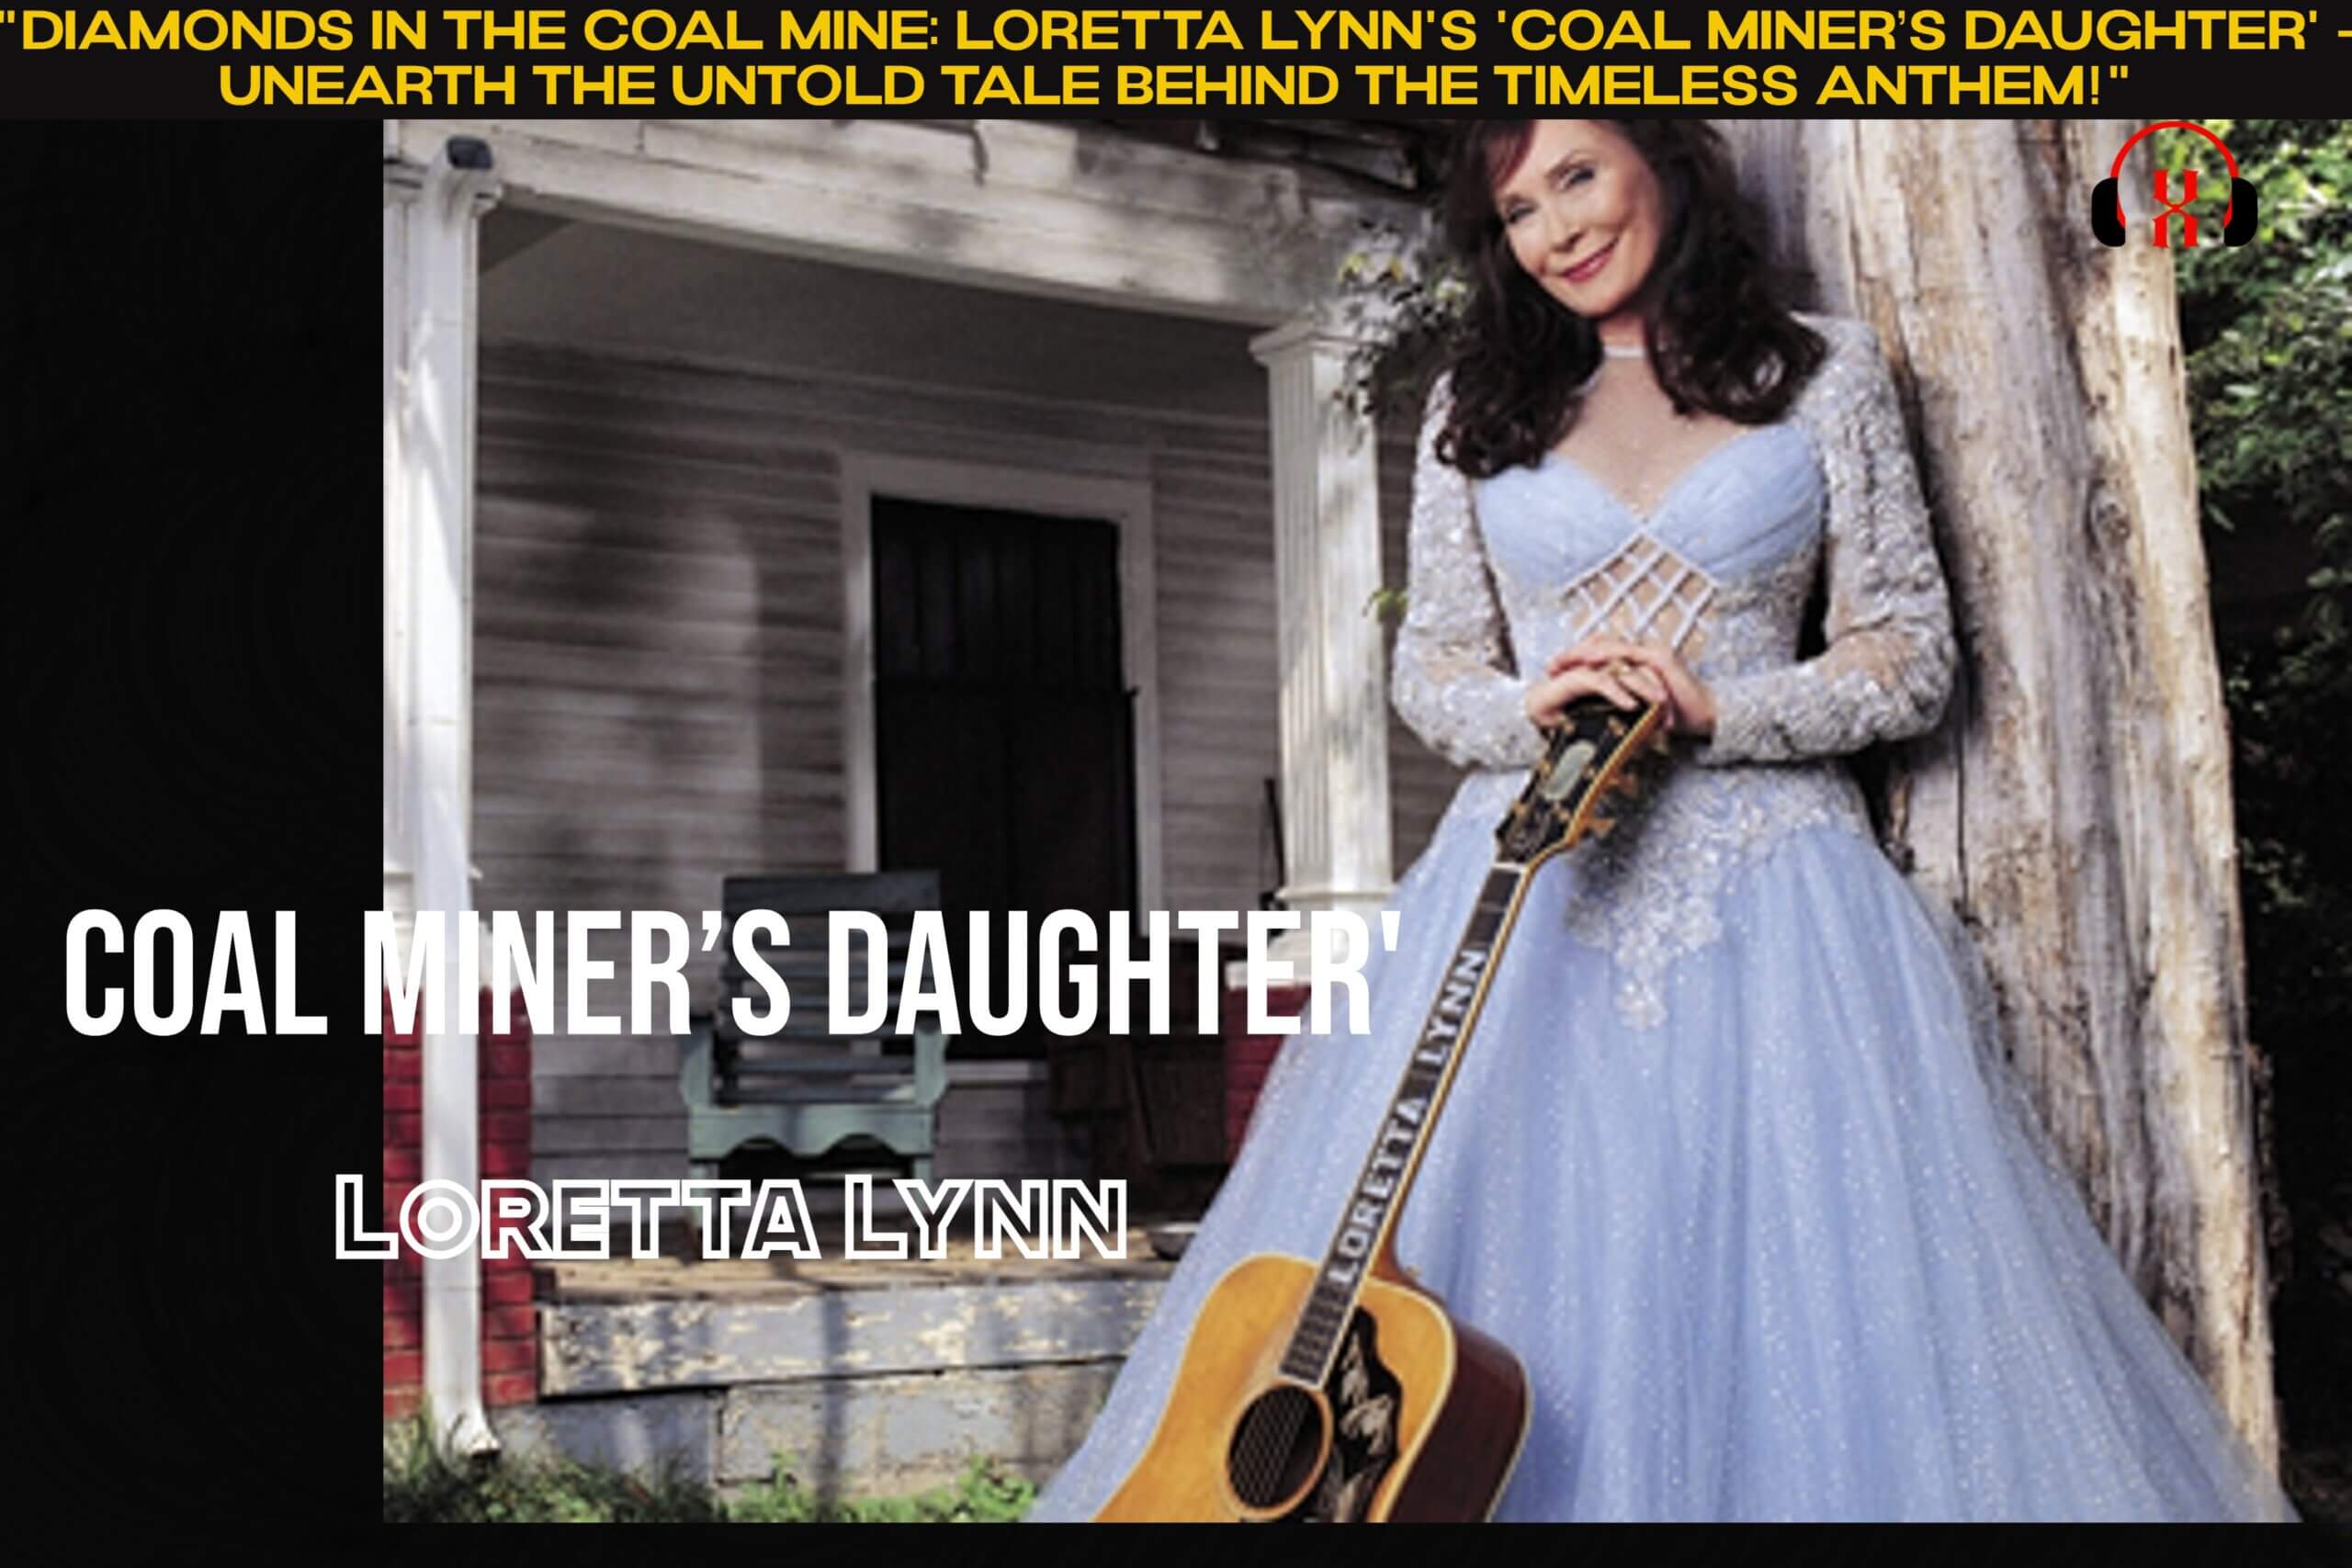 “Diamonds in the Coal Mine: Loretta Lynn’s ‘Coal Miner’s Daughter’ – Unearth the Untold Tale Behind the Timeless Anthem!”